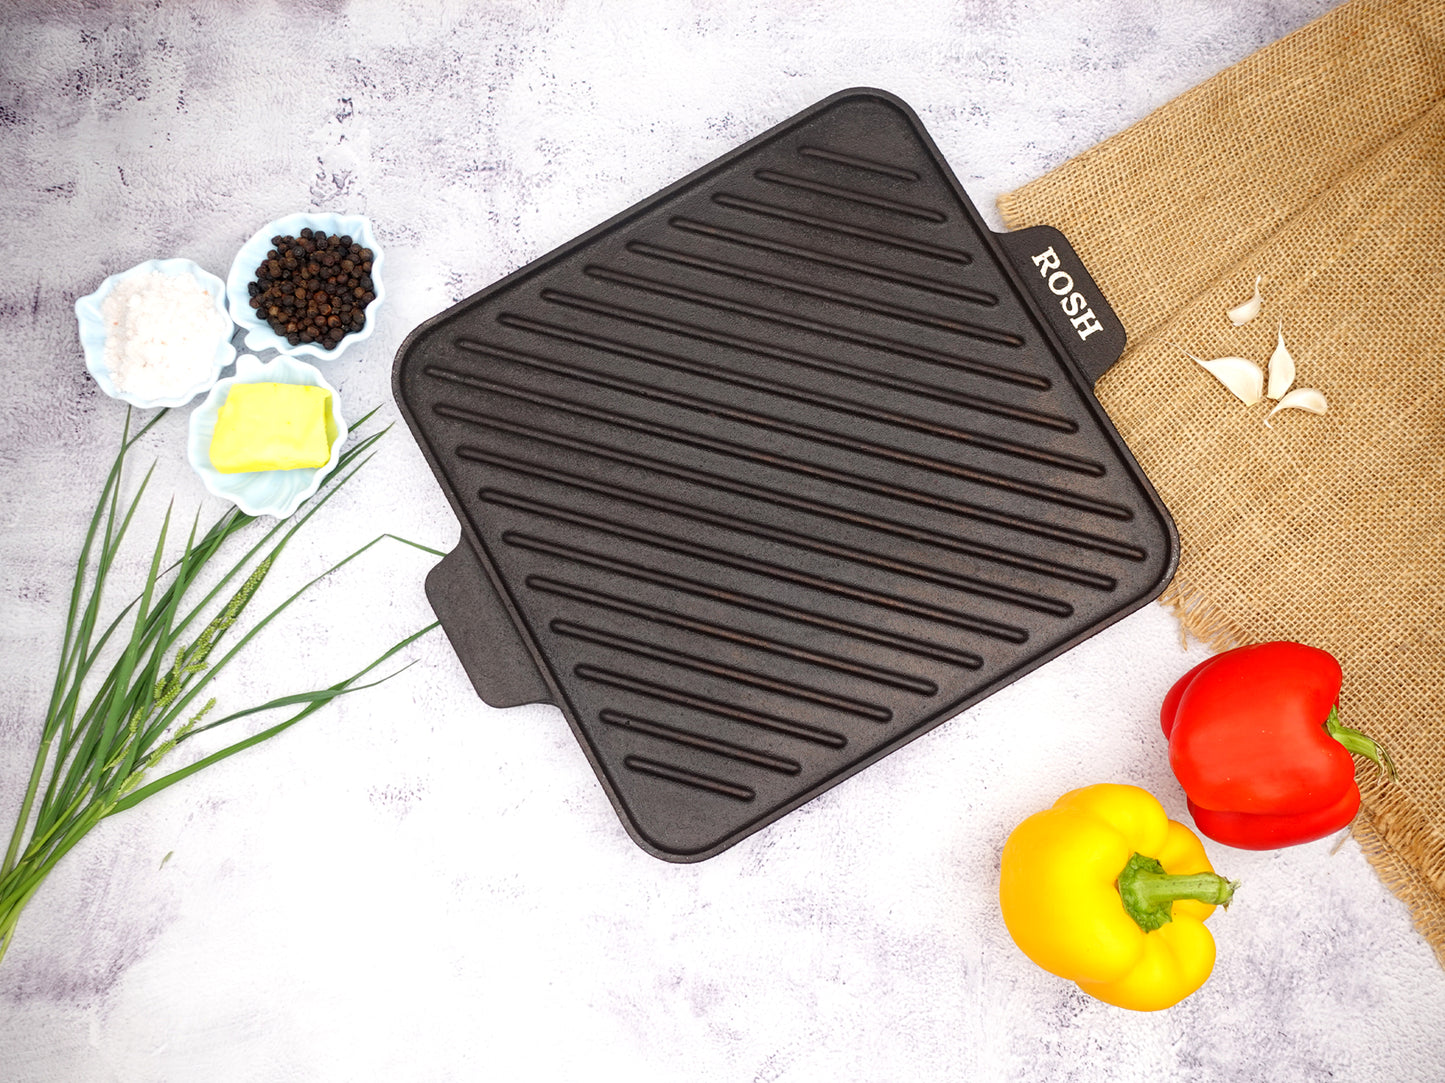 Grill Pan - Reversable. (2 In 1 ) .